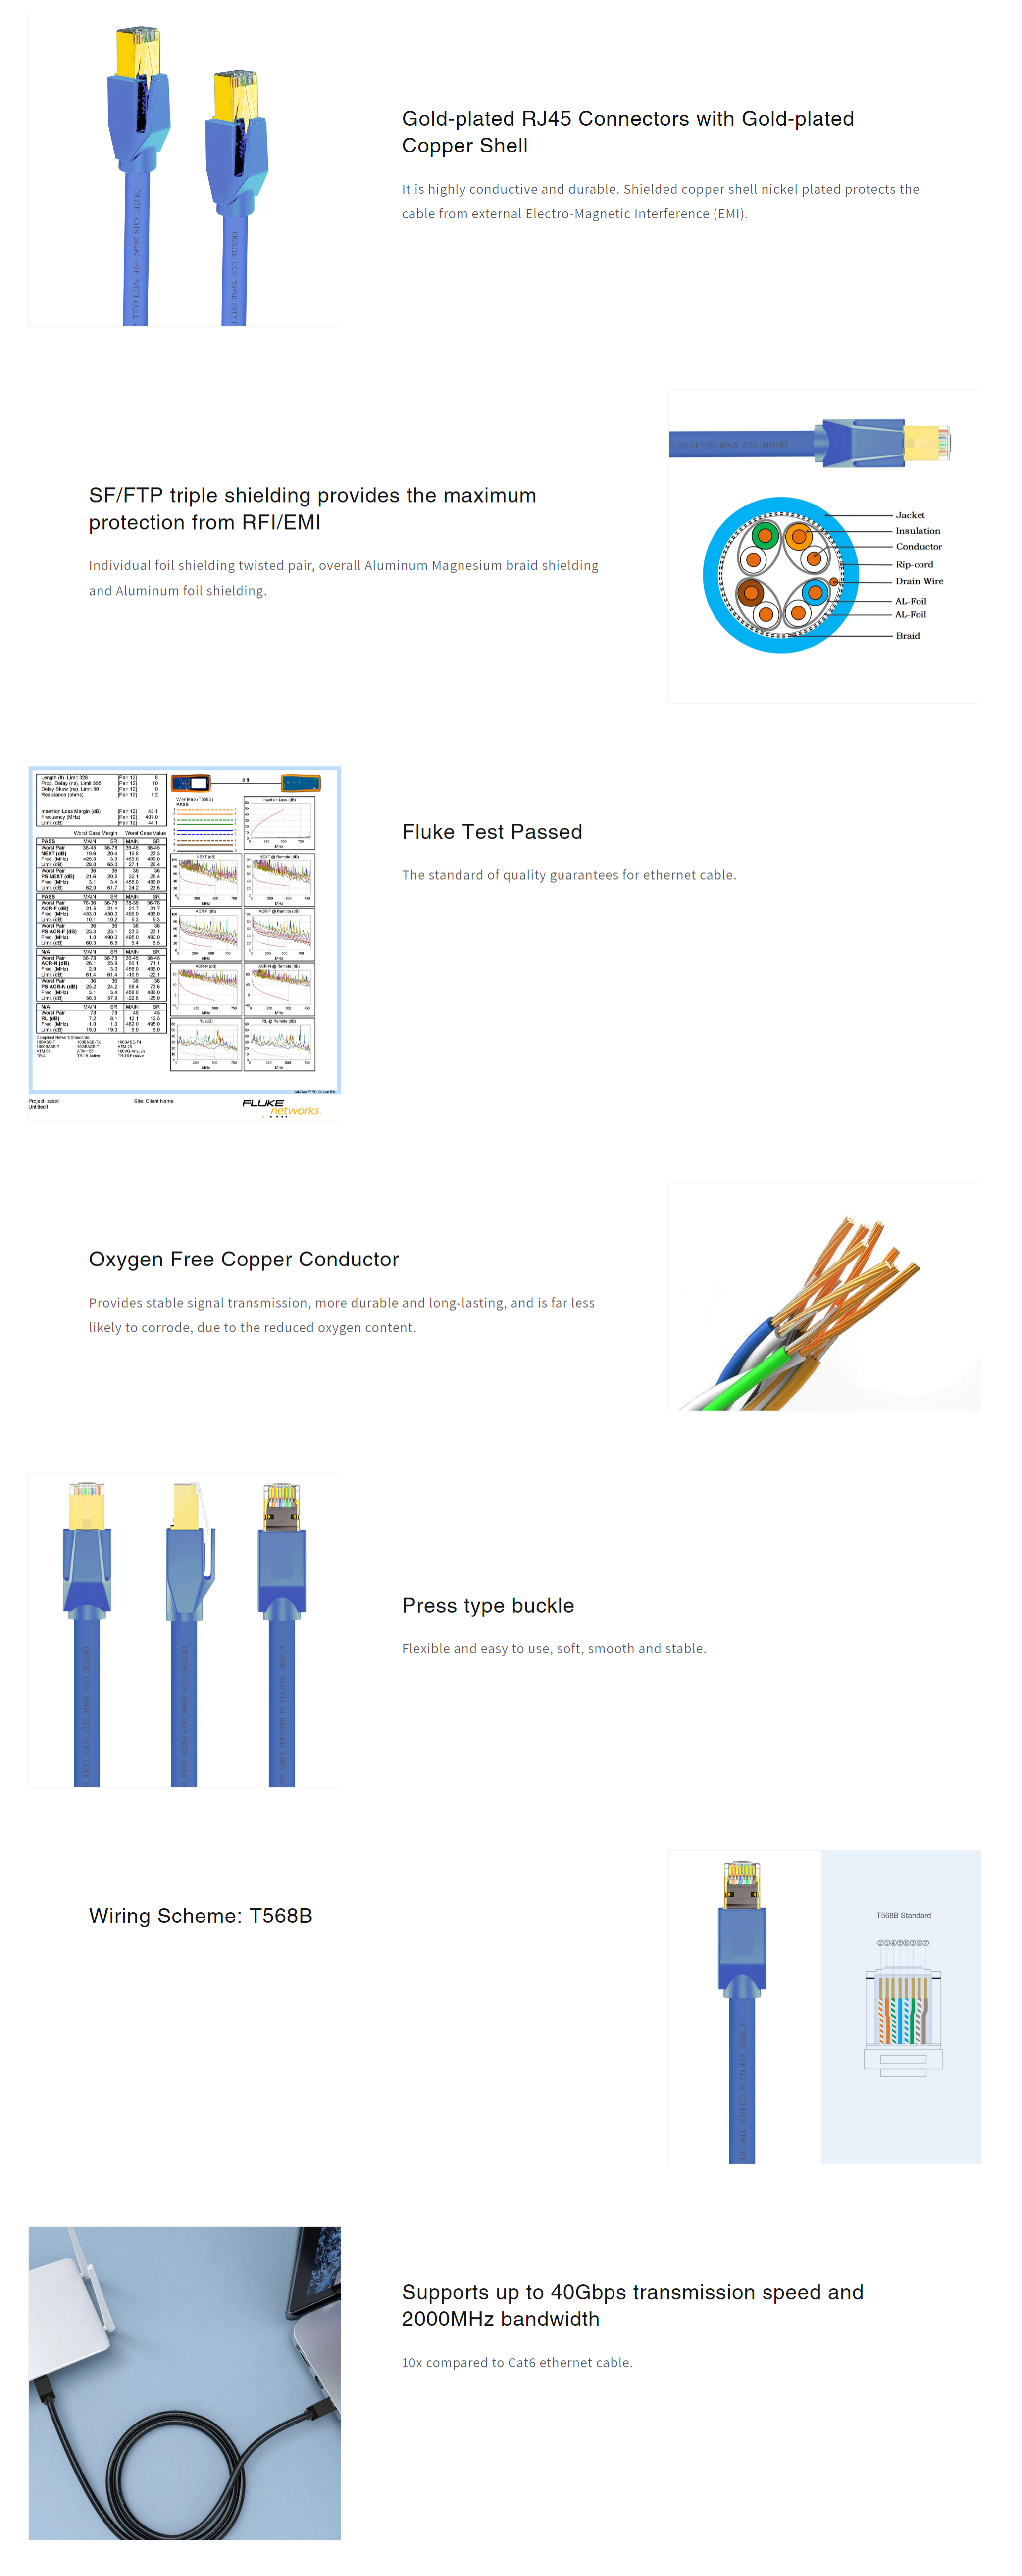 A large marketing image providing additional information about the product Cruxtec CAT8 1m 40GbE SF/FTP Triple Shielding Ethernet Cable Blue - Additional alt info not provided